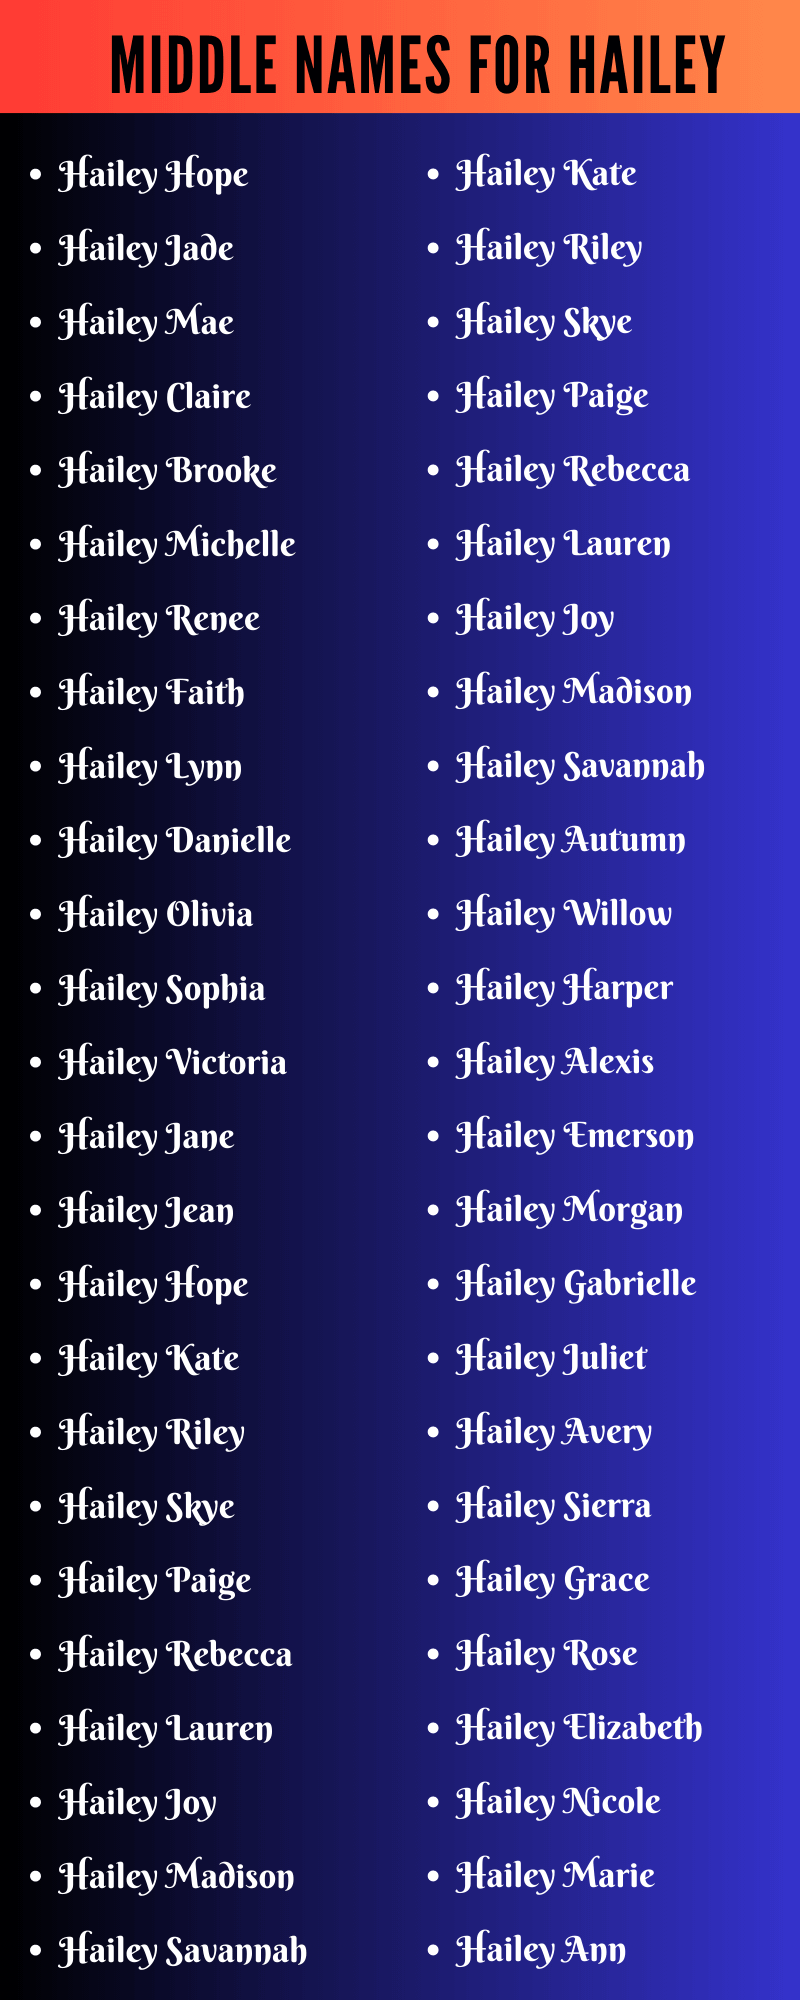 Middle Names For Hailey